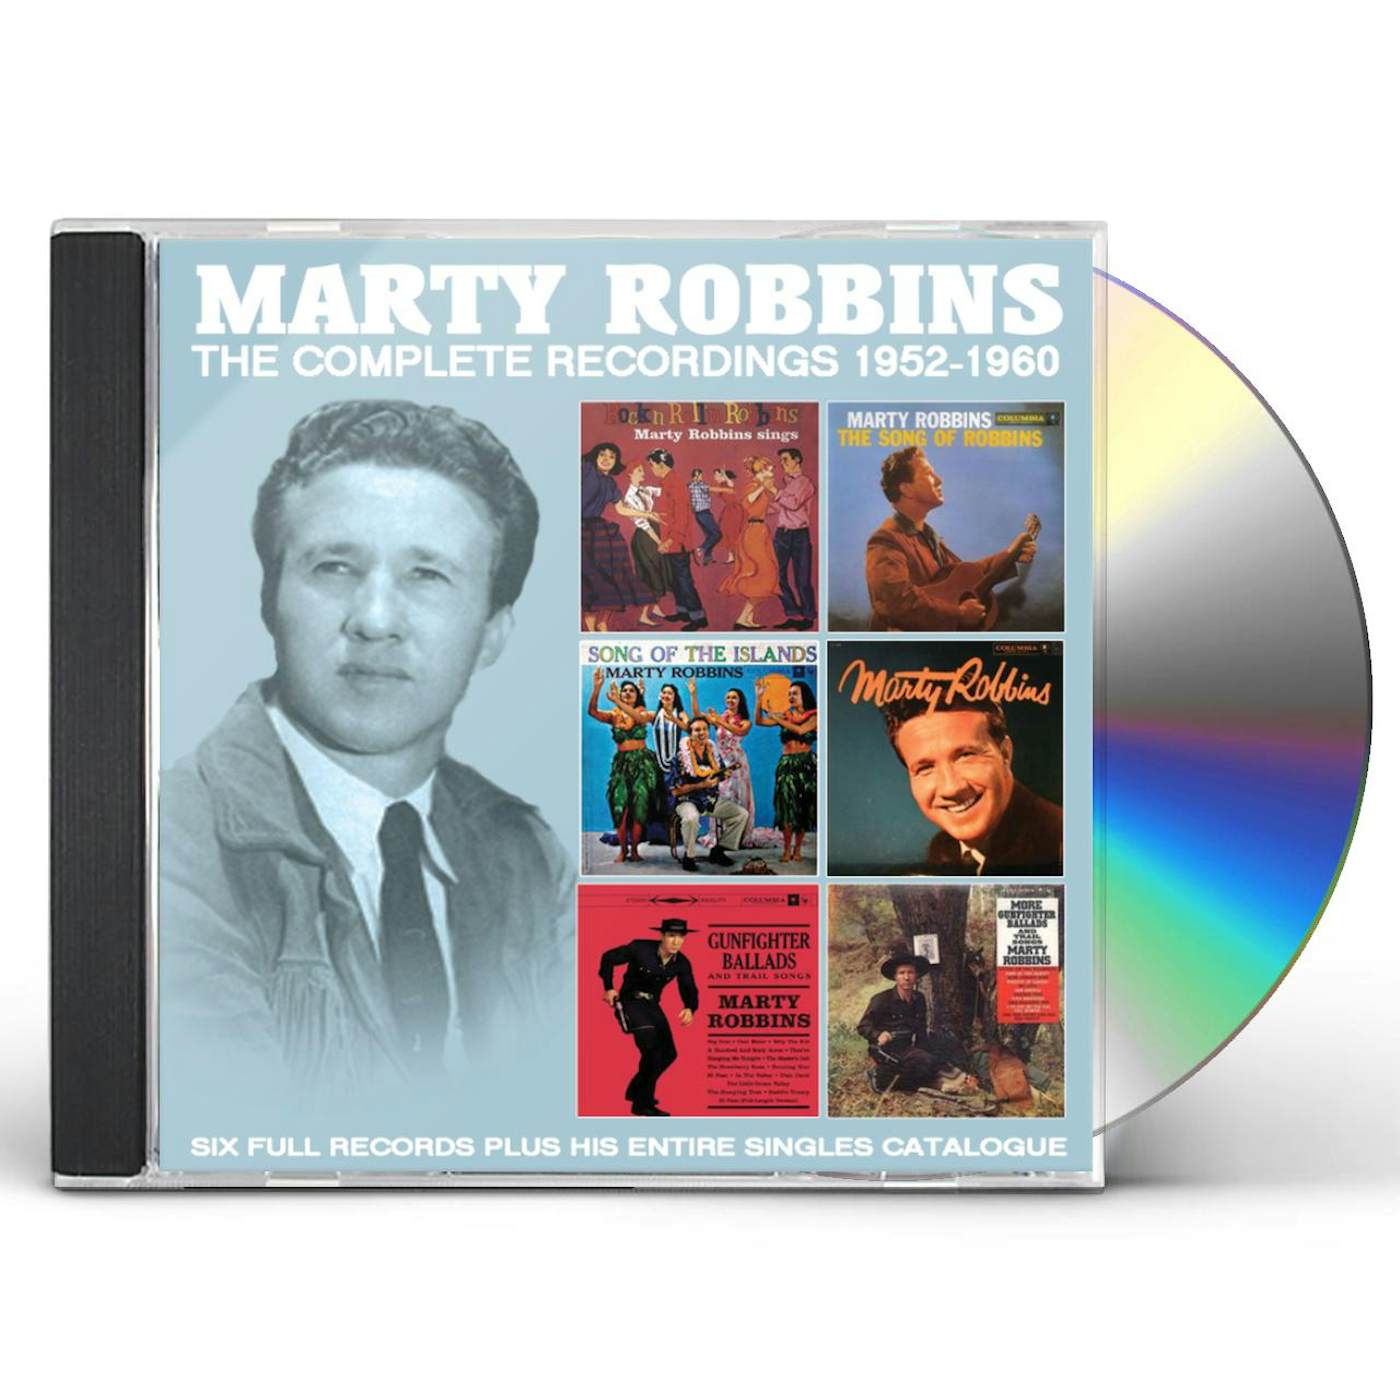 Marty Robbins COMPLETE RECORDINGS: 1952-1960 CD